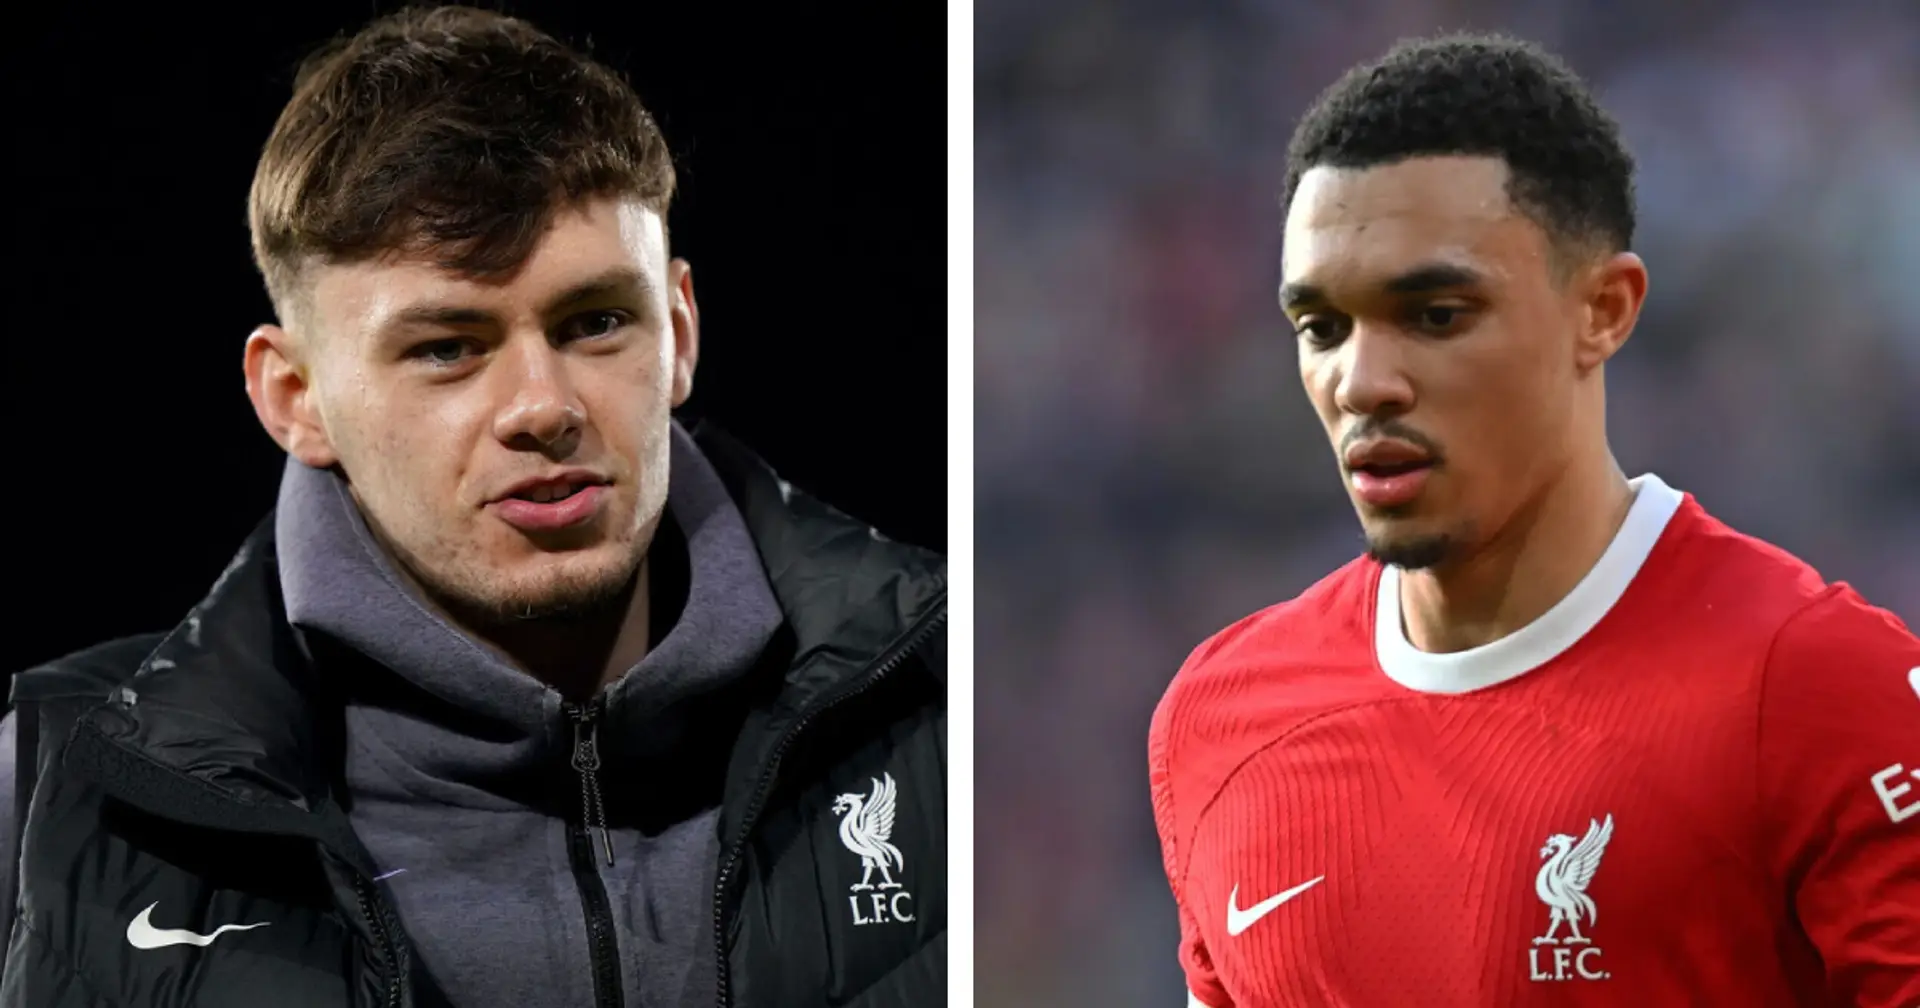 Conor Bradley explains how he can play in one lineup with Trent Alexander-Arnold